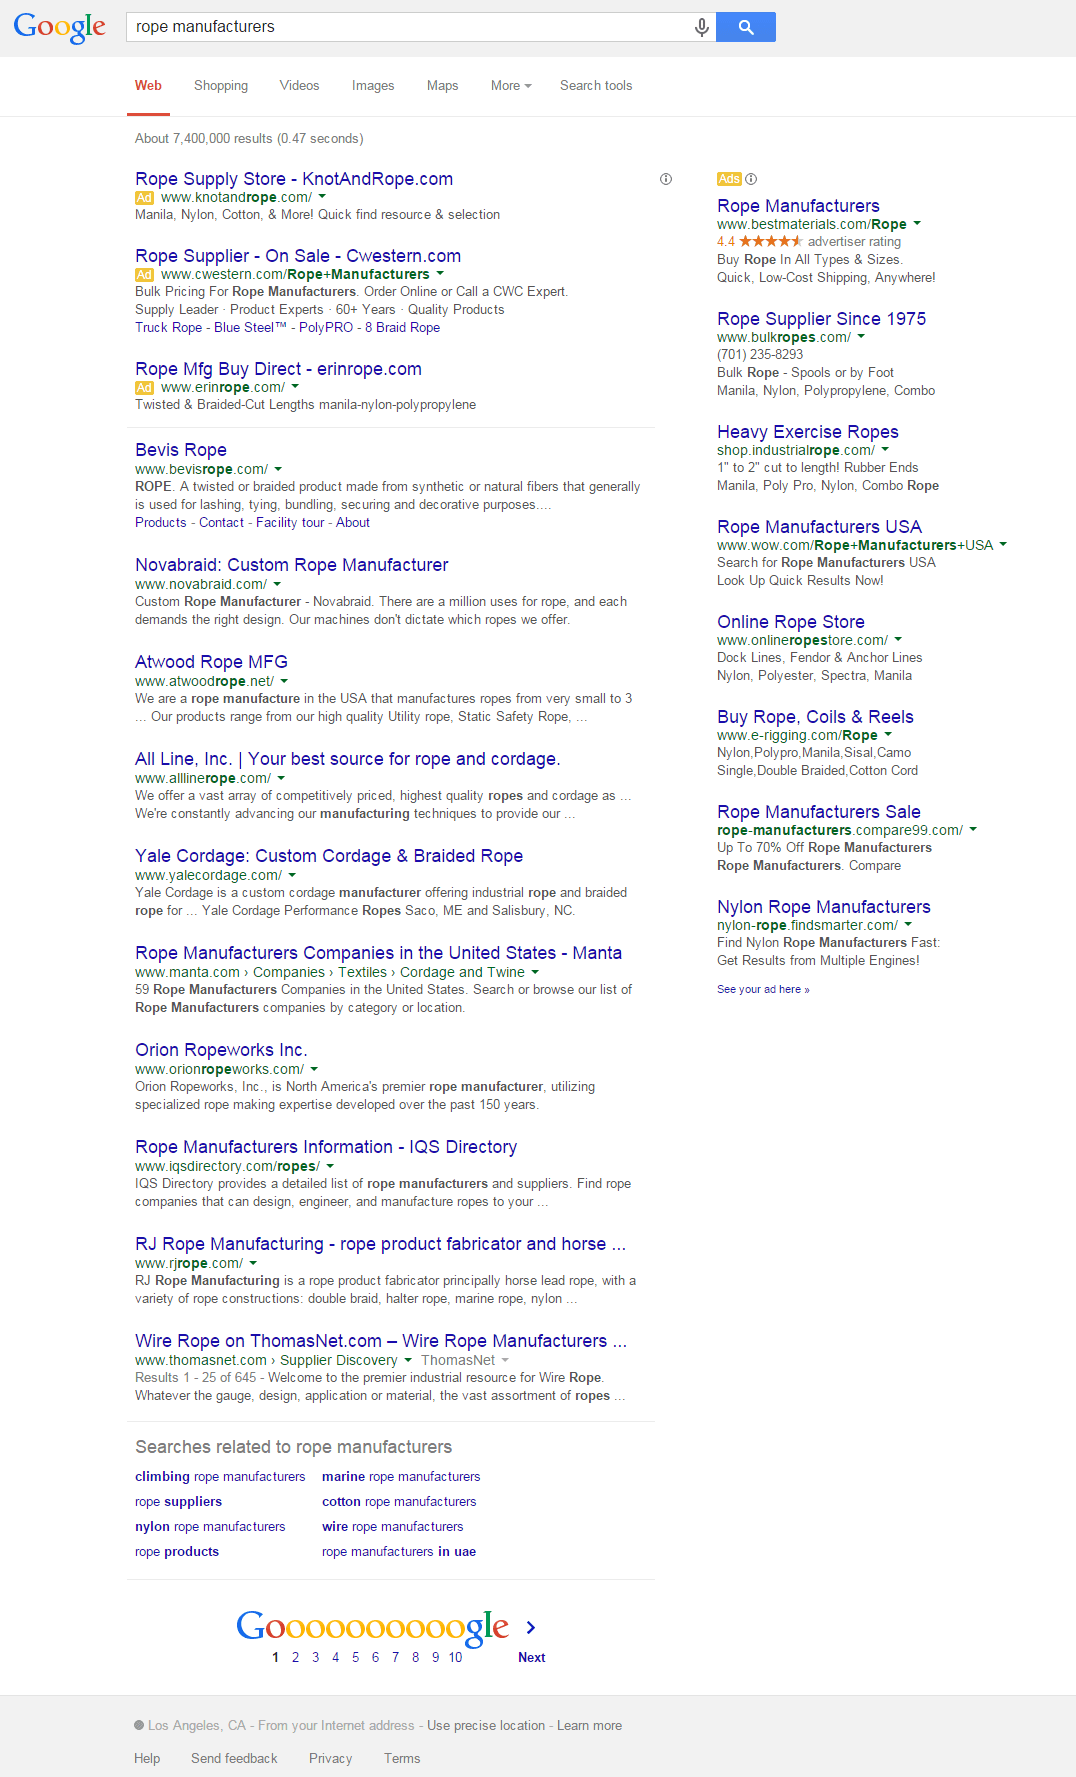 Google Search Results - Titles and Descriptions